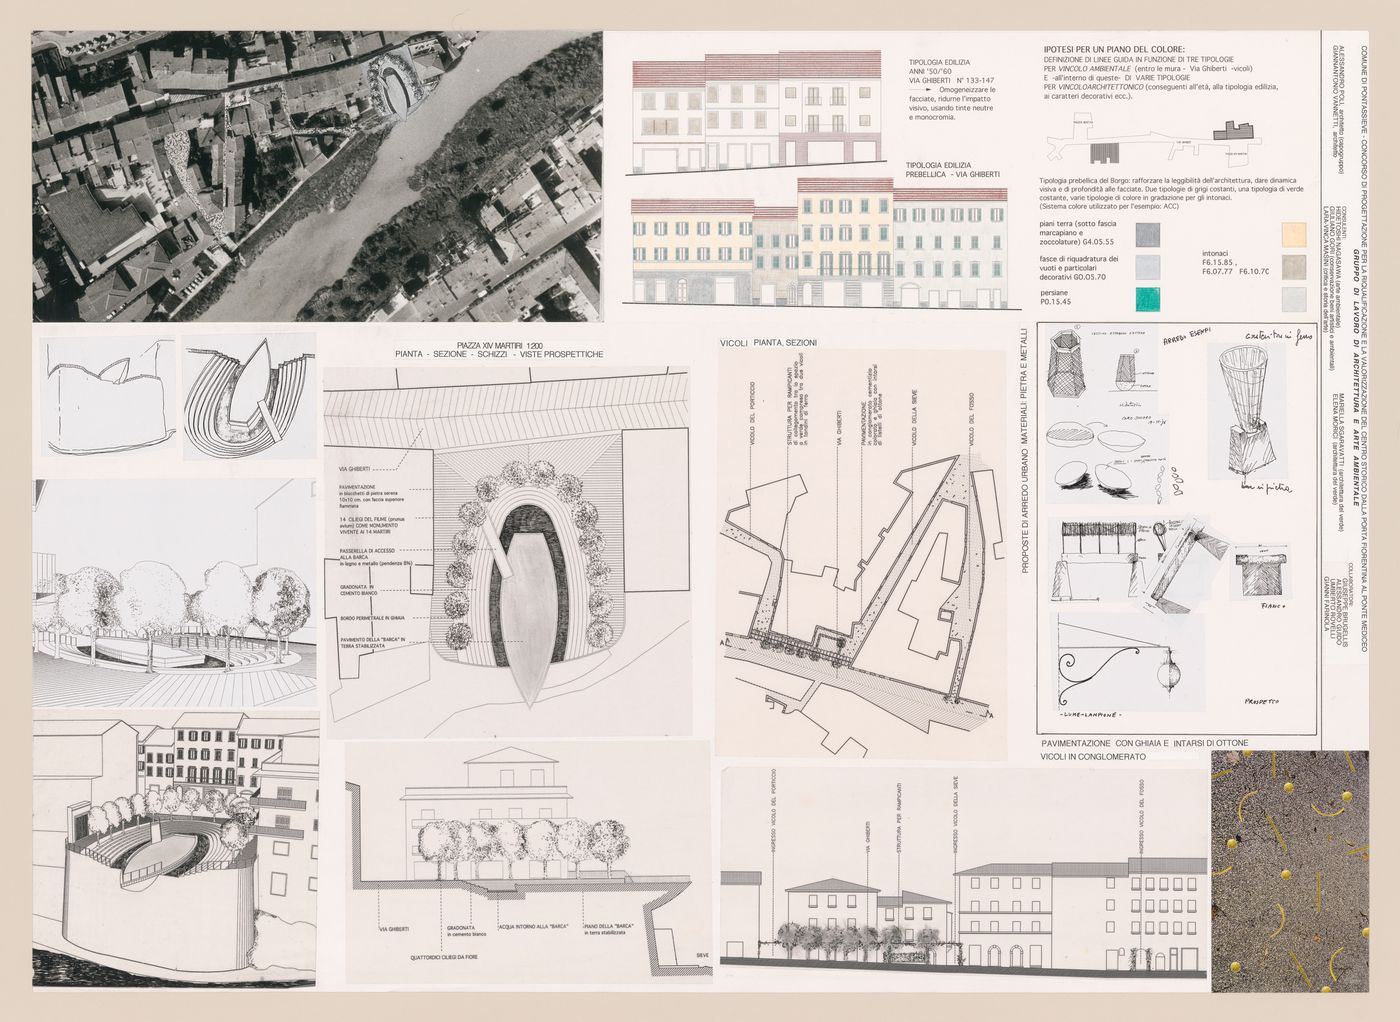 Drawings and photograph for Riqualificazione centro Storico di Pontassieve [Redevelopment of the historical center of Pontassieve], Florence, Italy